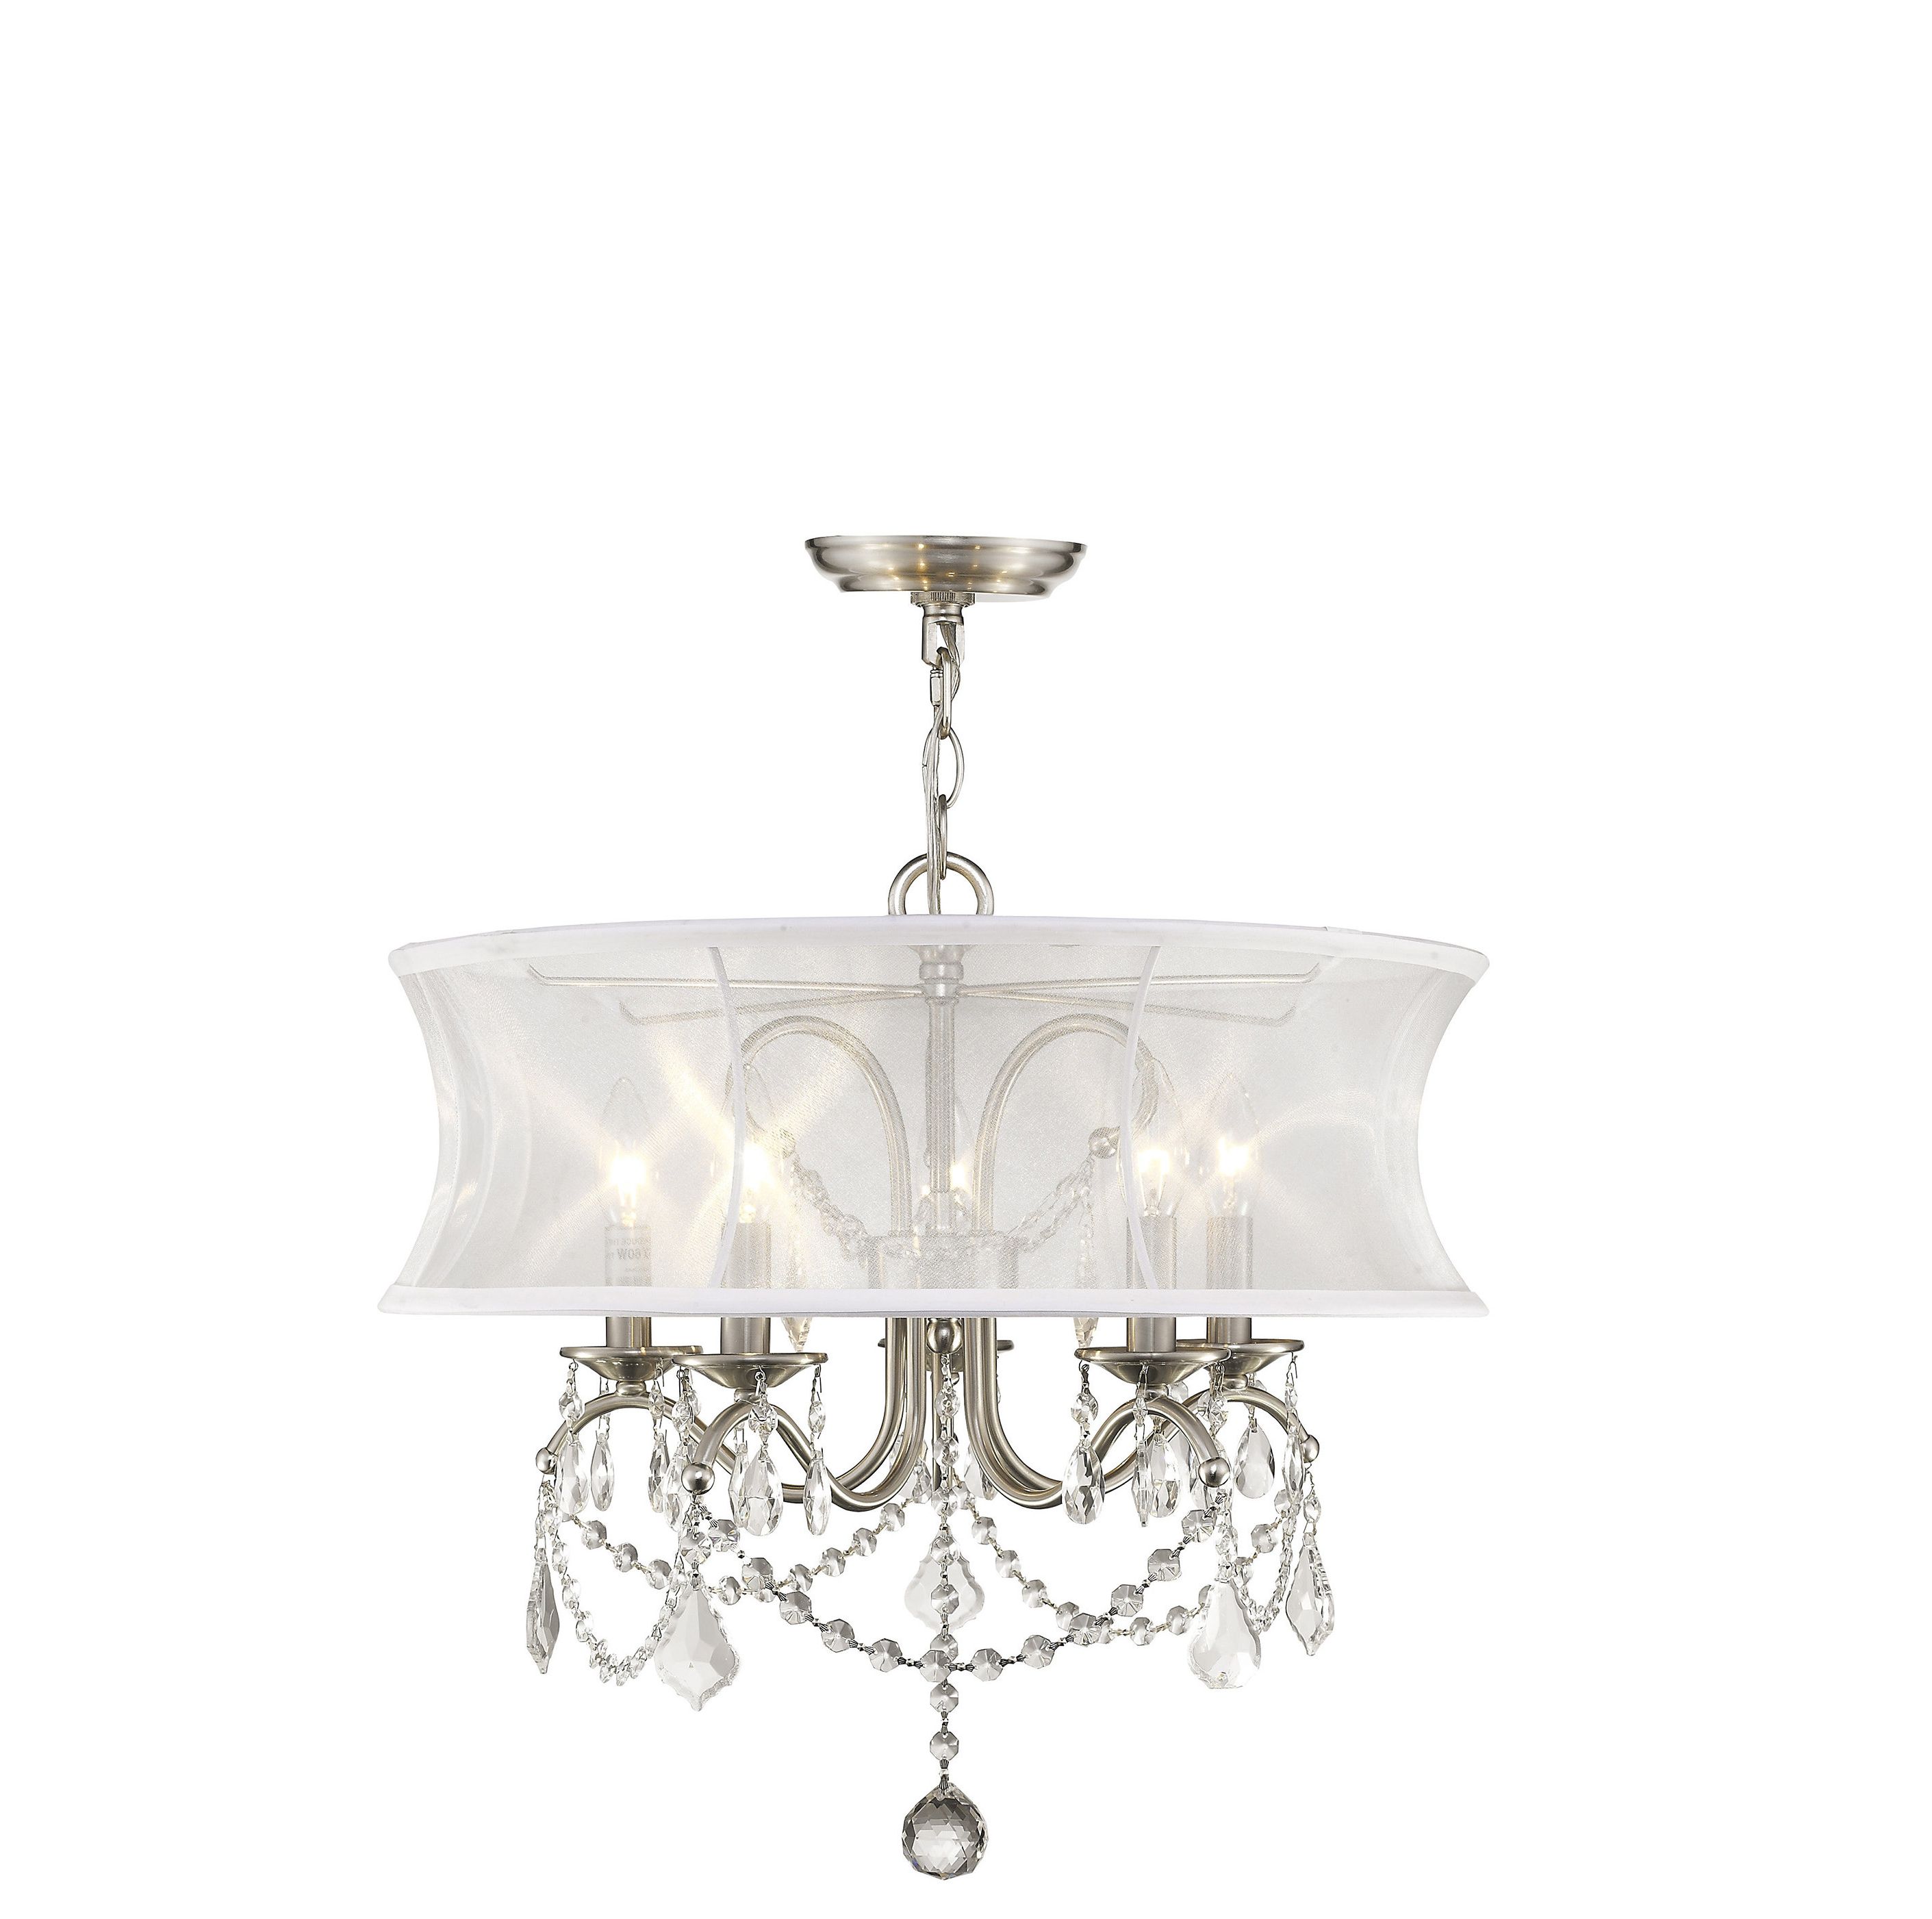 Fashionable Buster 5 Light Drum Chandeliers With Regard To Aubrianne Drum Chandelier (View 14 of 25)